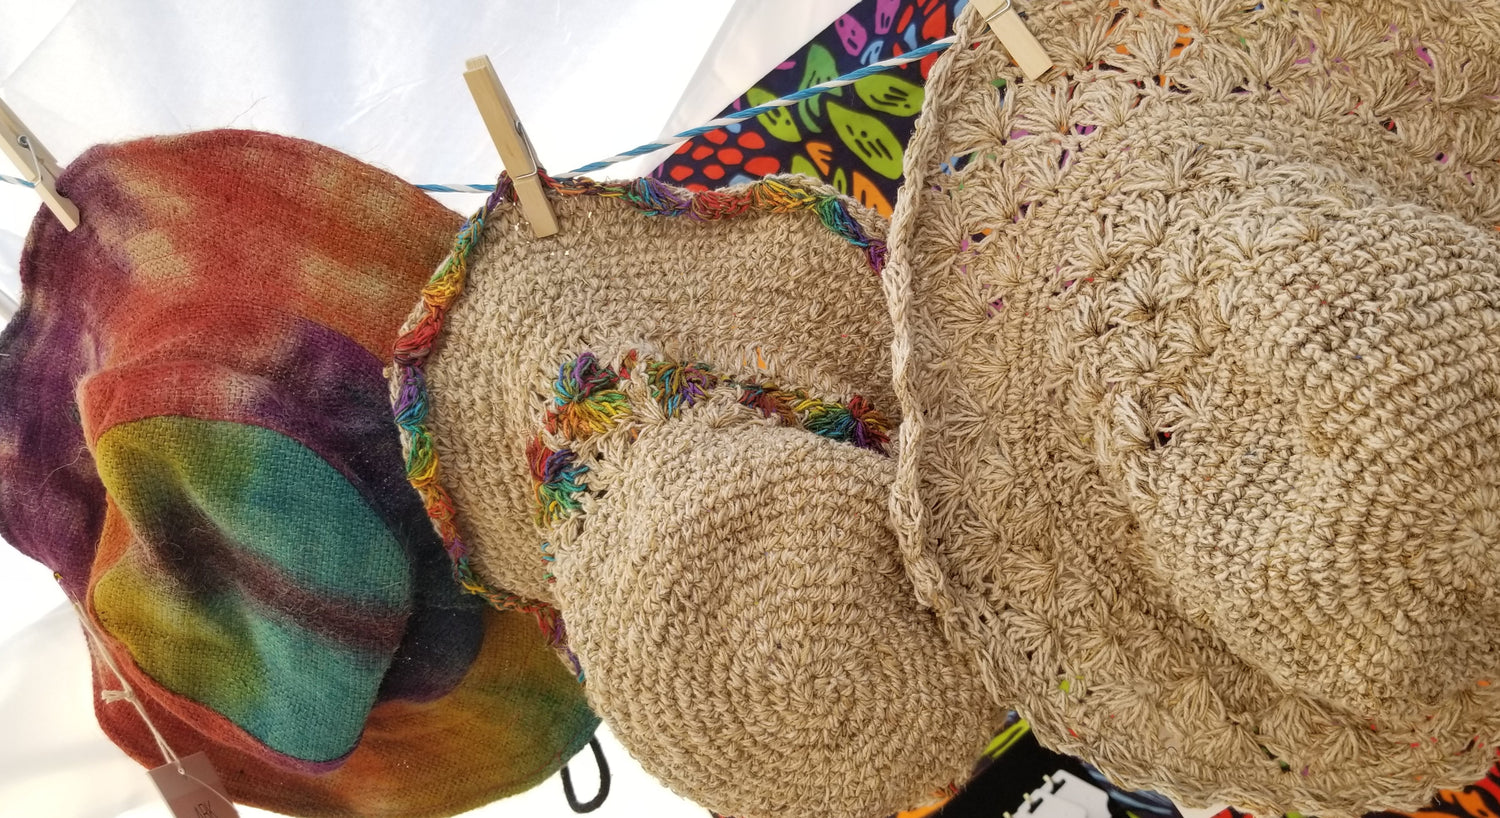 selection of boho and hippie style hats for men and women at the boho hippie hut in midland michigan